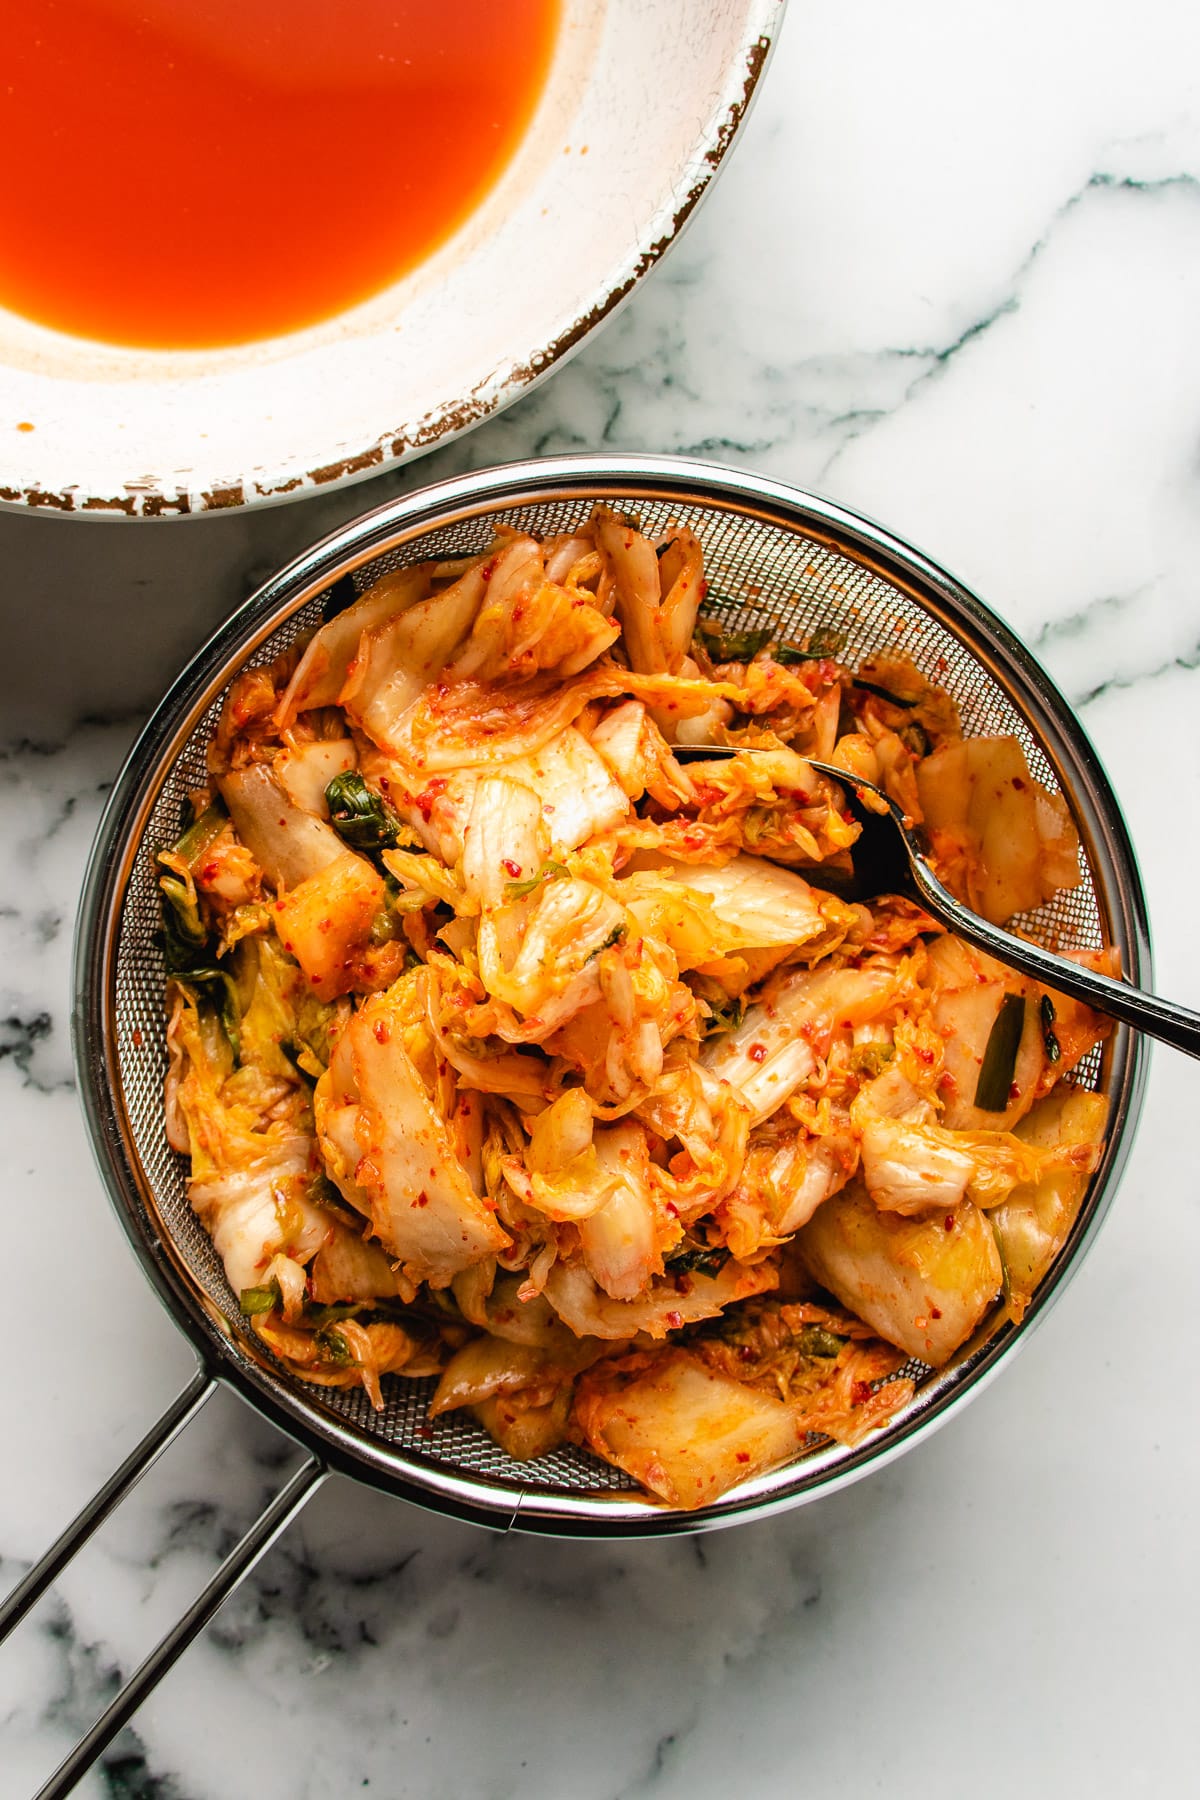 Photo shows draining the kimchi over a sieve and save the kimchi juice in a separate bowl